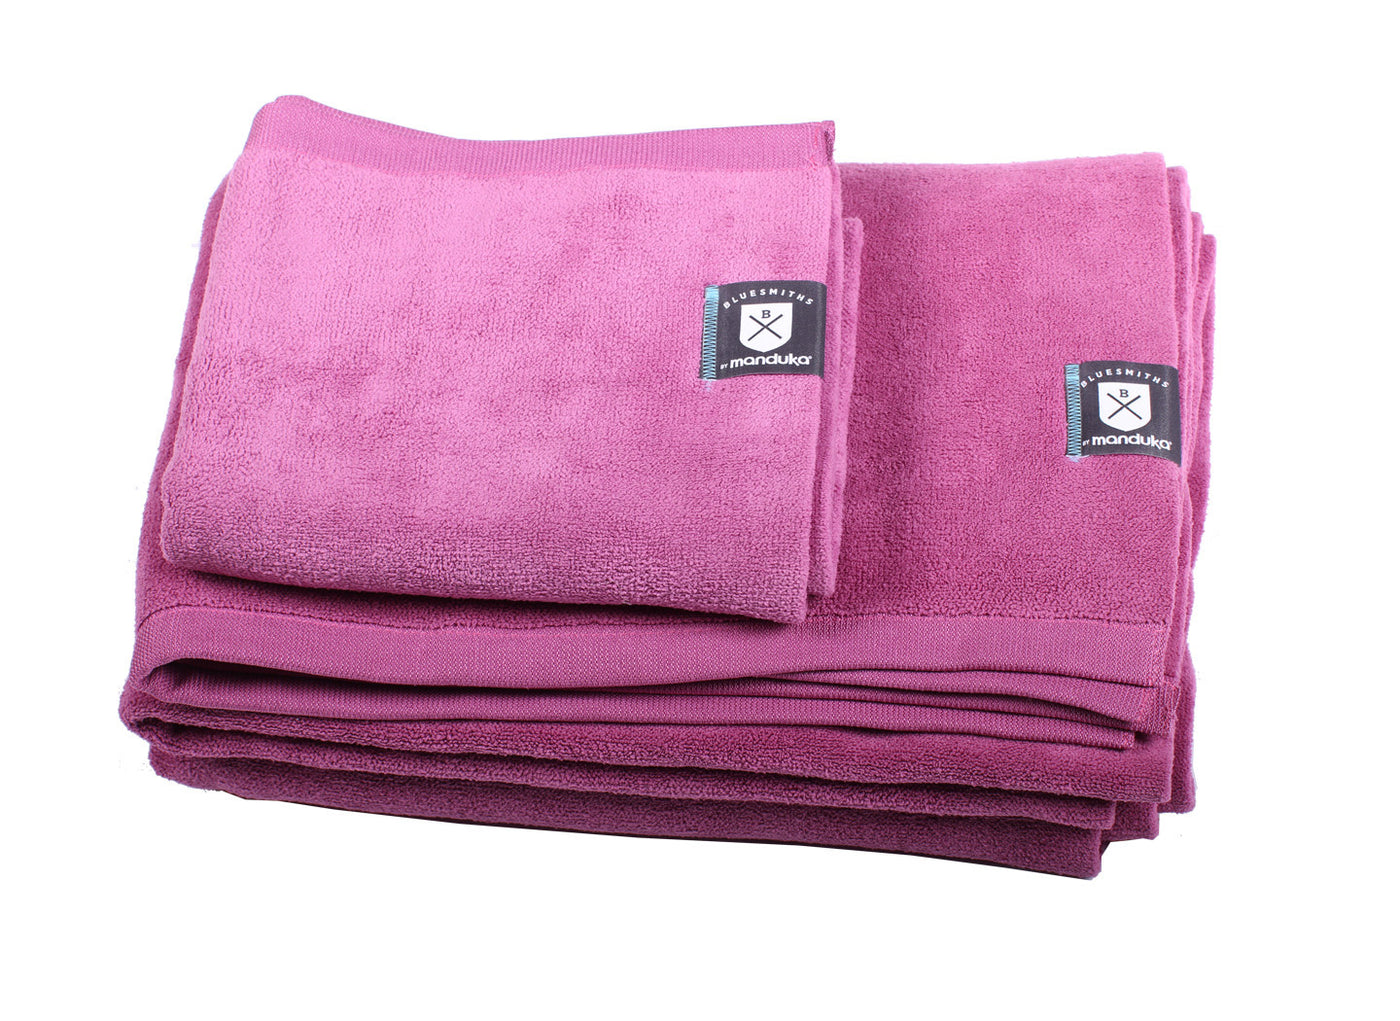  Performance Towels by BLUESMITHS Crafted Waterwear  - 3